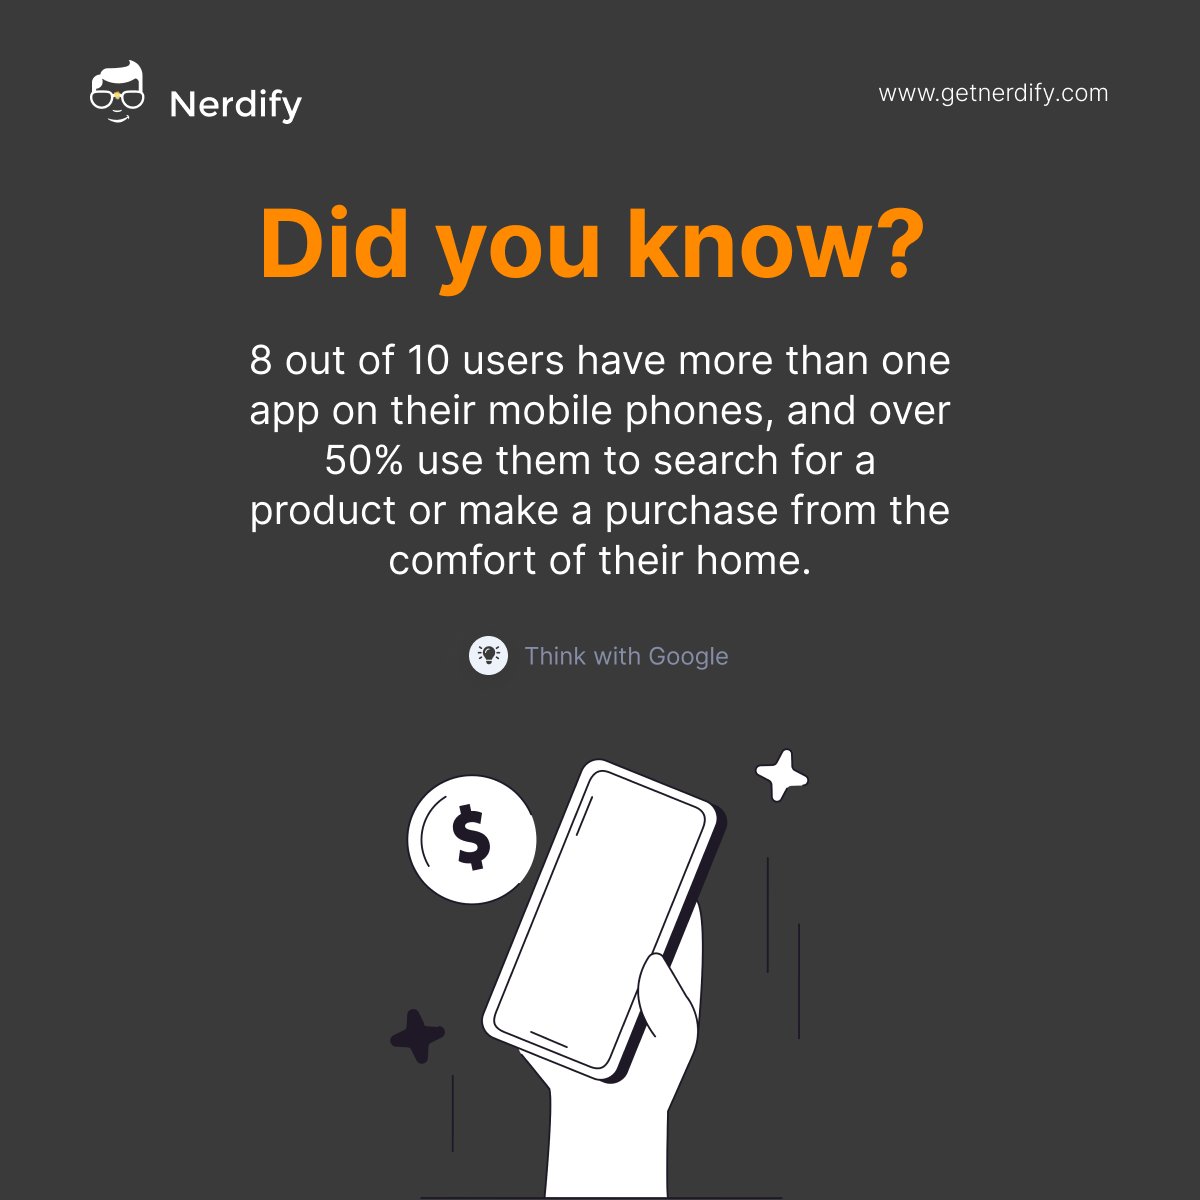 Mobile apps are the go-to for over 80% of users! Are you leveraging this trend to connect with your customers? Let's create a seamless mobile experience for your brand and boost your sales from the comfort of their homes! 🛋️📱

#GetNerdify #Nerdify #MobileApps #UserEngagement